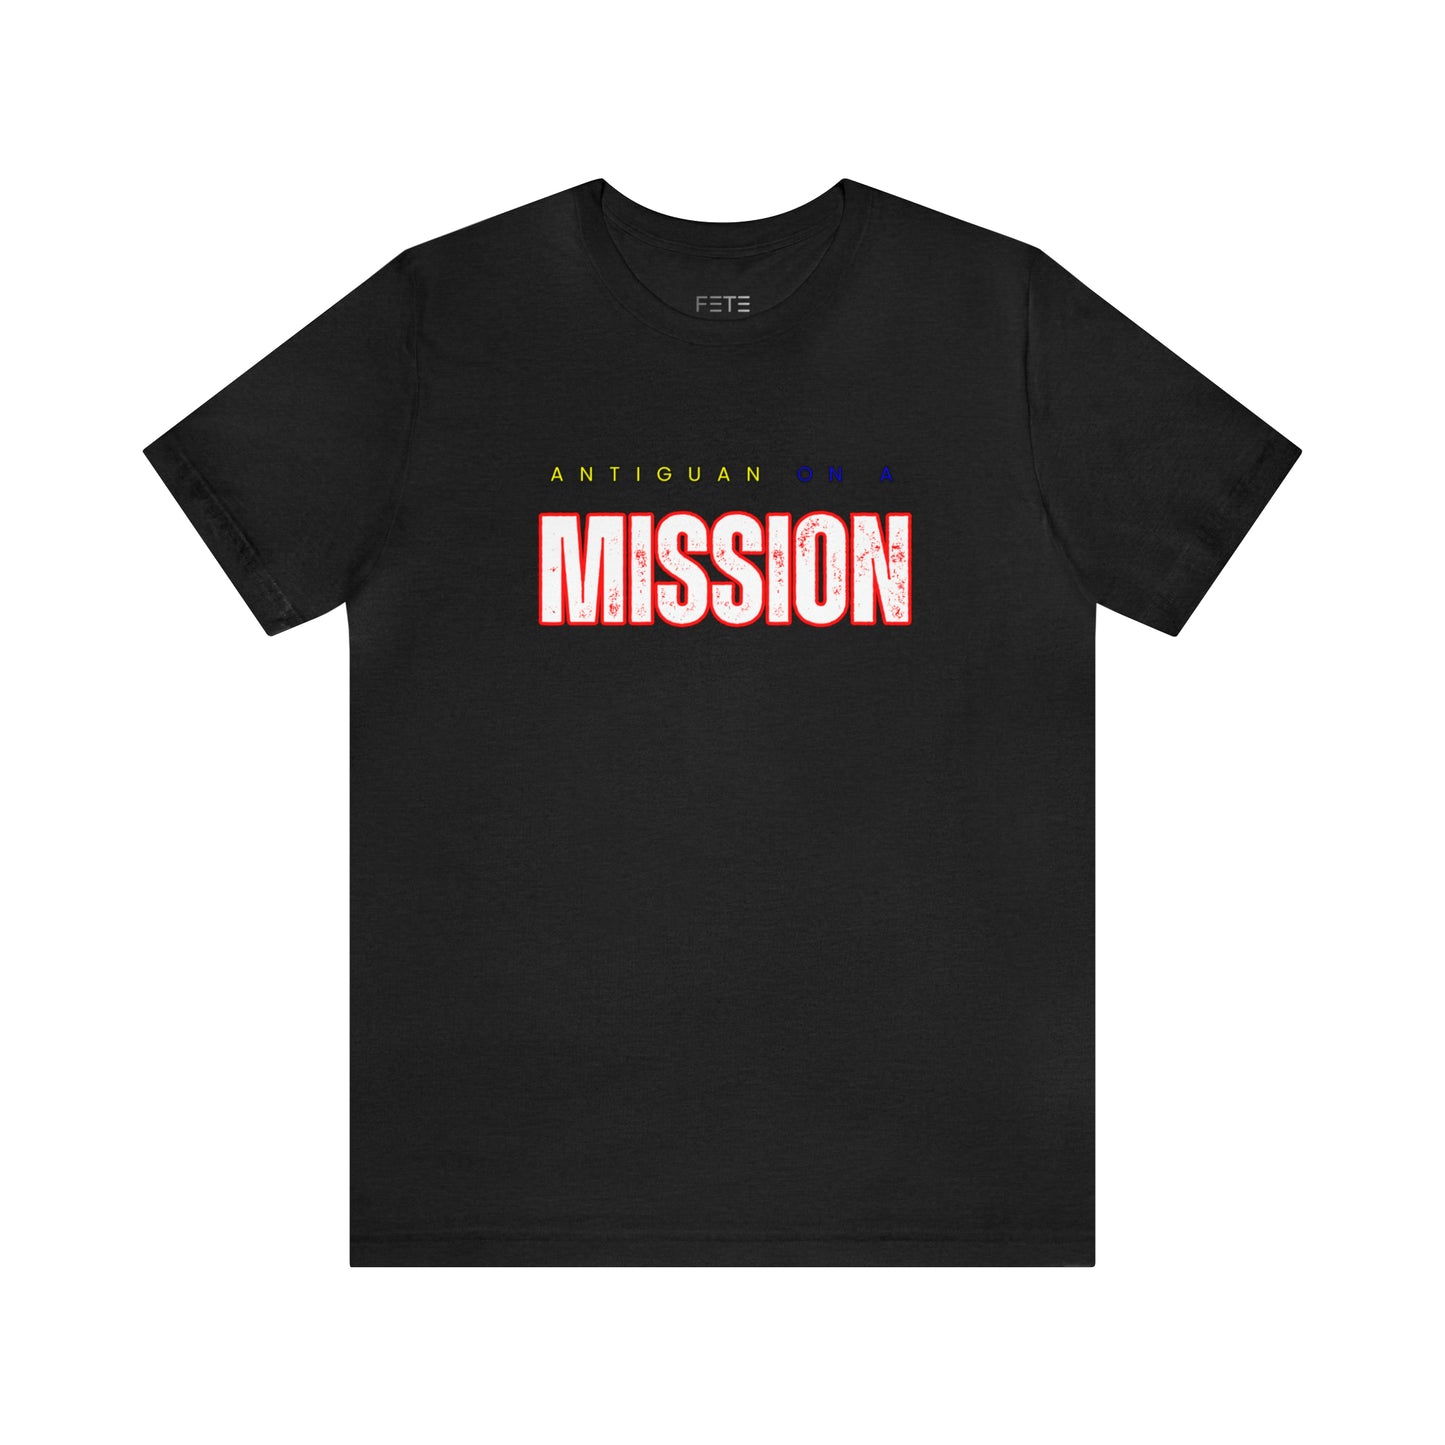 Antiguan on a Mission SS Tee